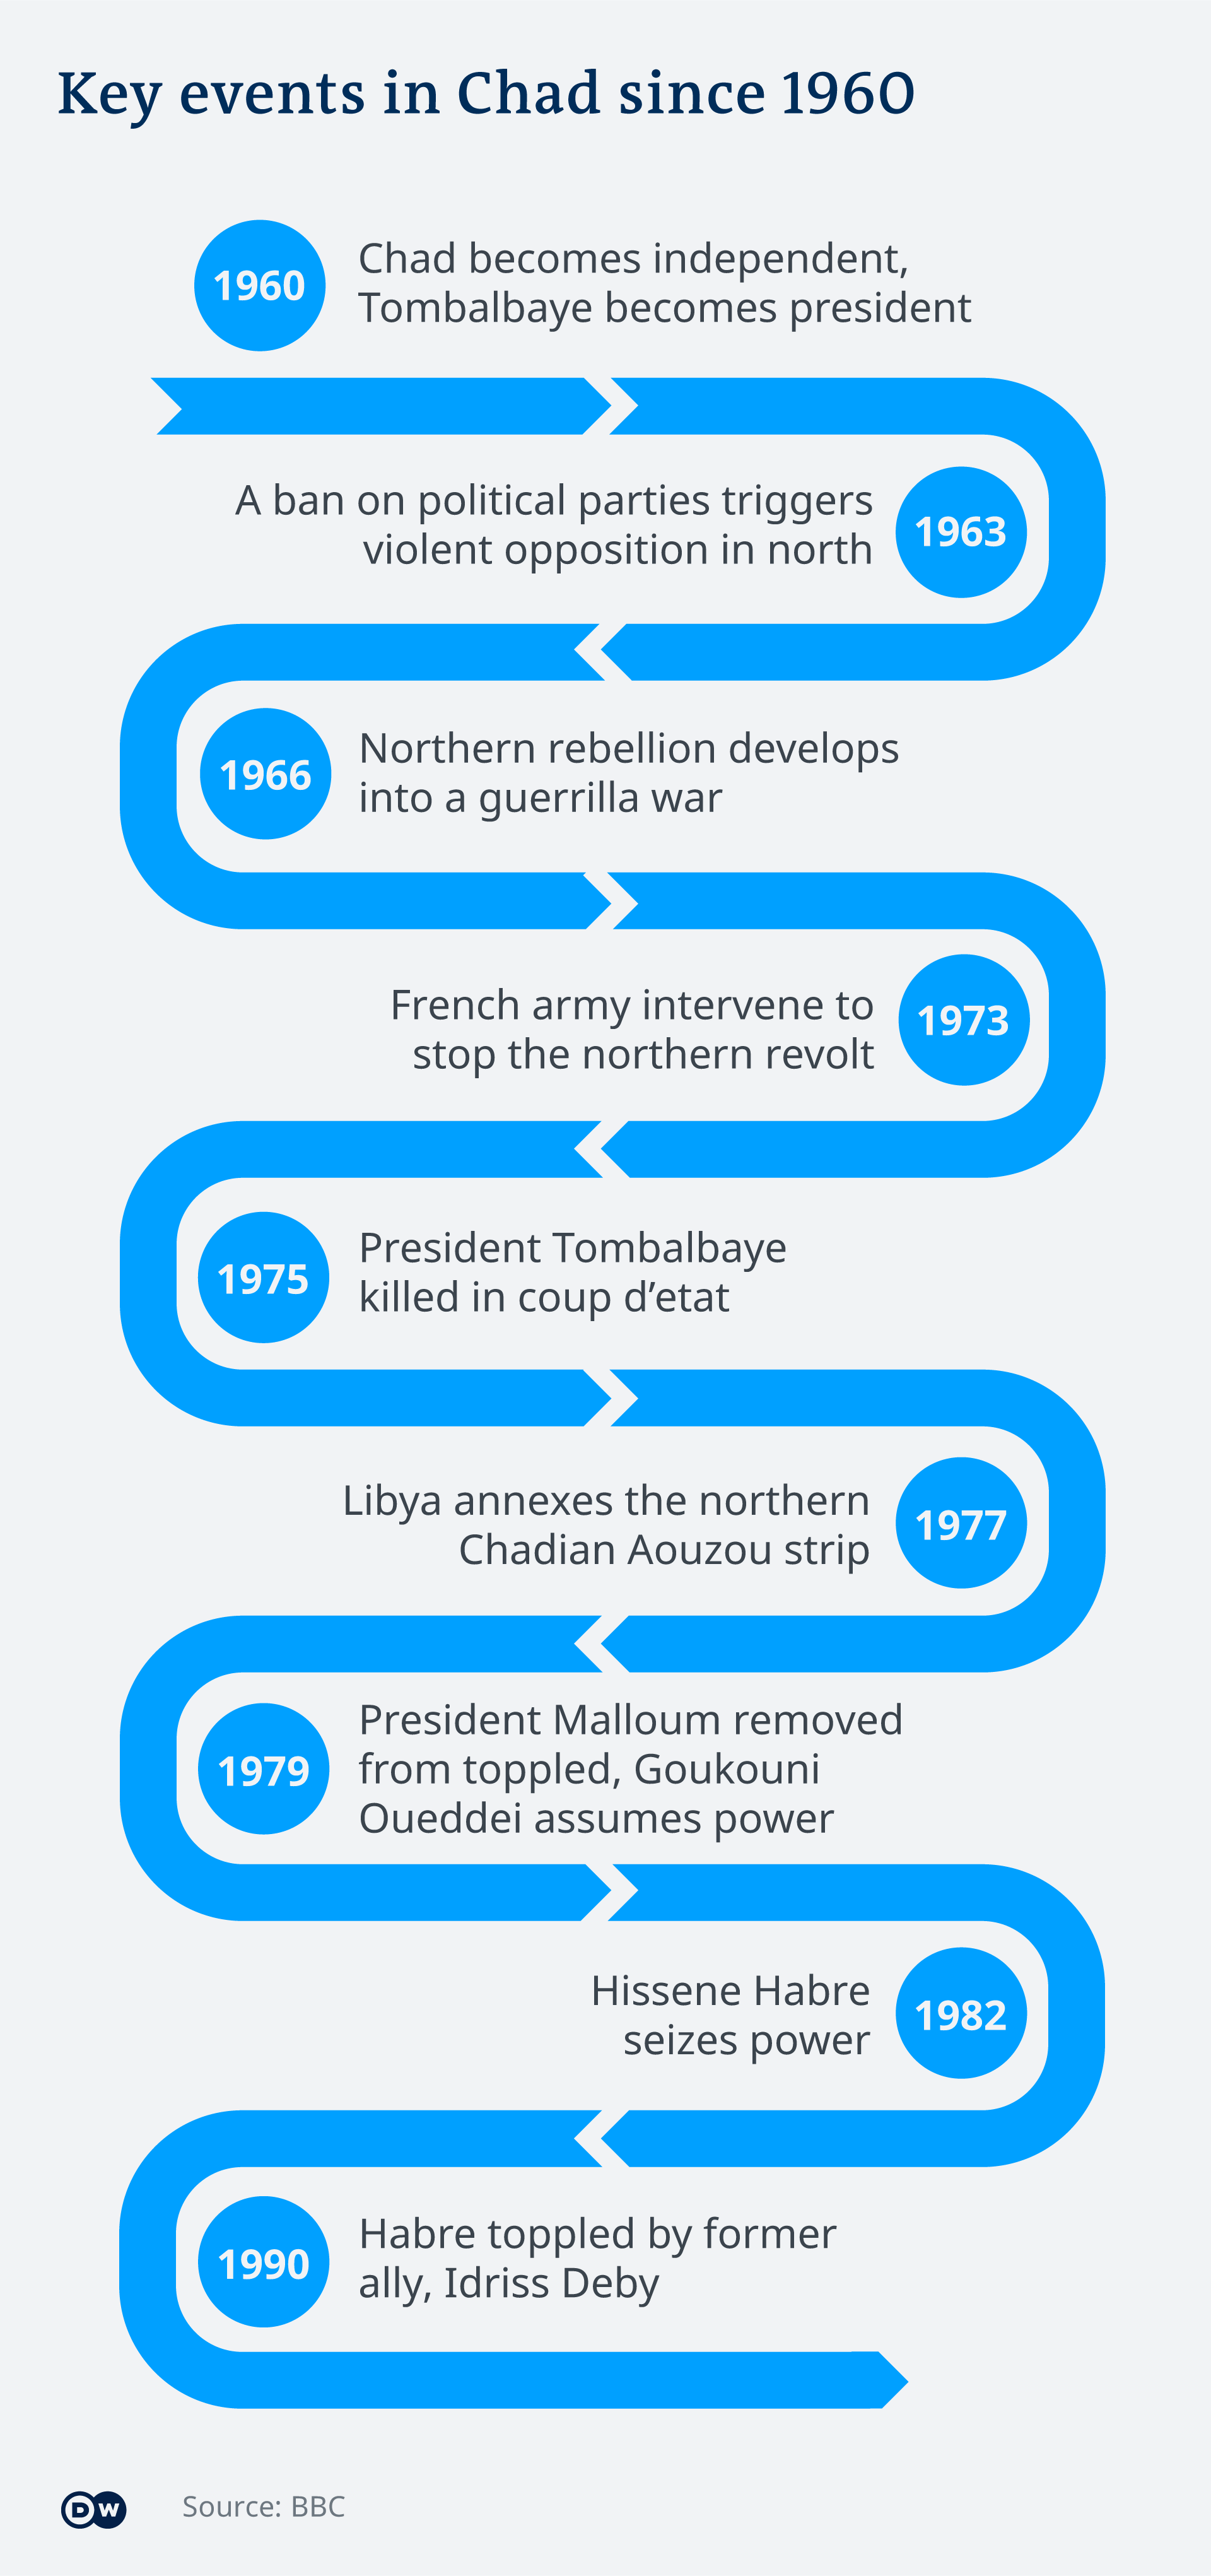 Political changes in Chad between 1960 and 1990